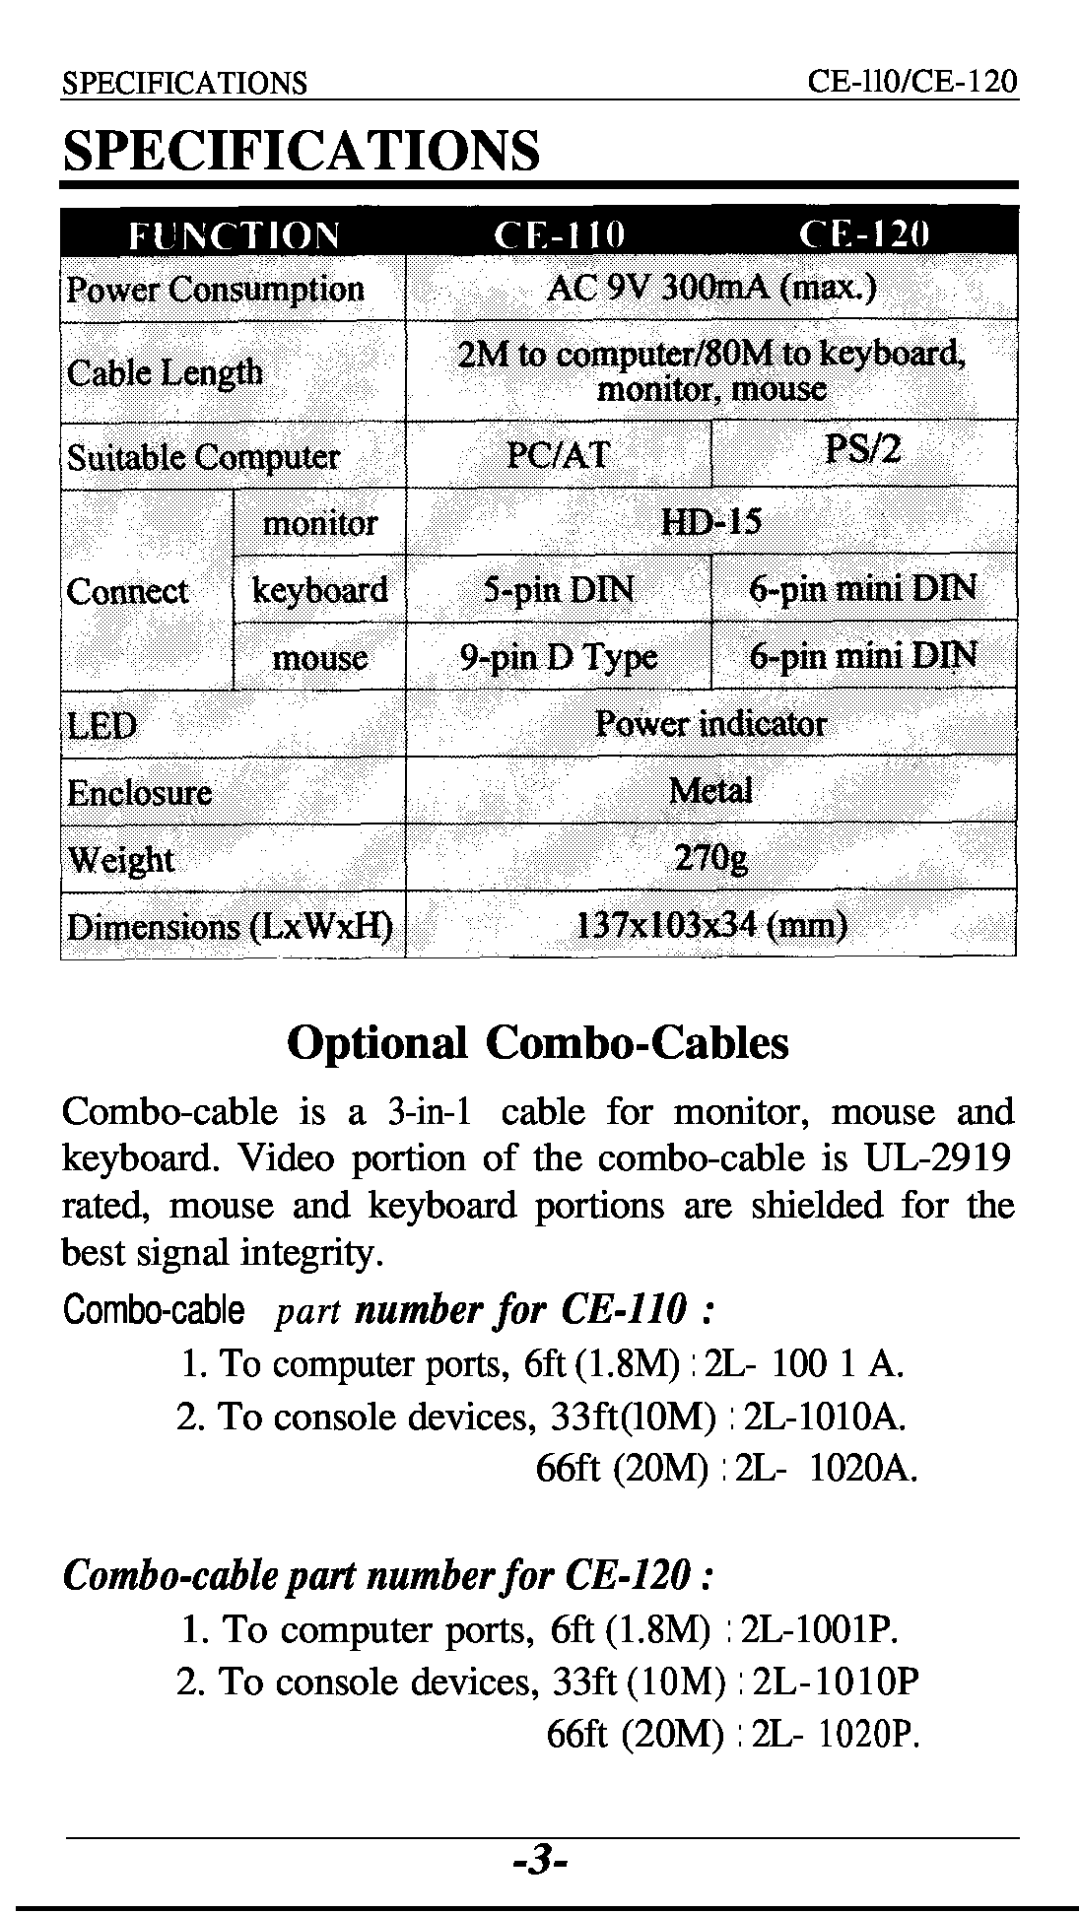 ATEN Technology CE- 110, CE- 120 user manual Specifications, Optional Combo-Cables, Combo-cable part number for CE-110 